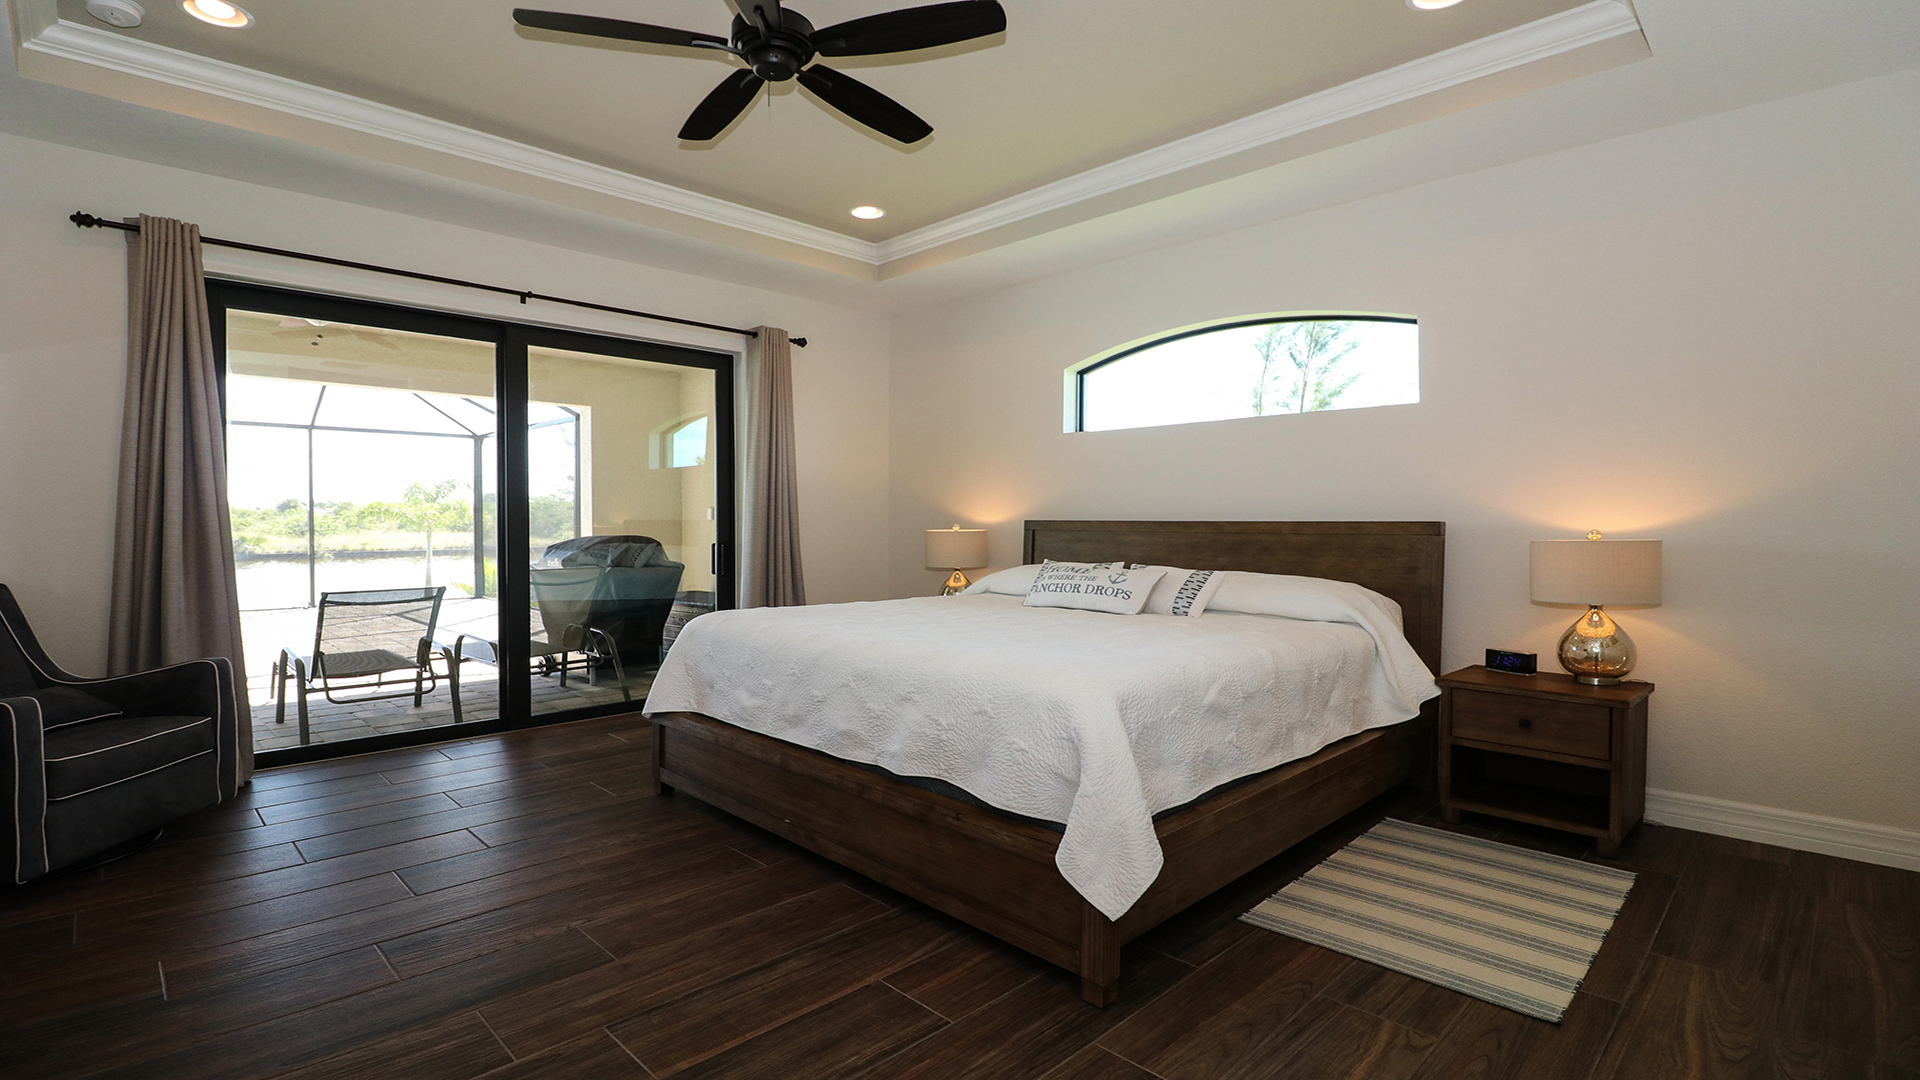 King master bedroom with patio access